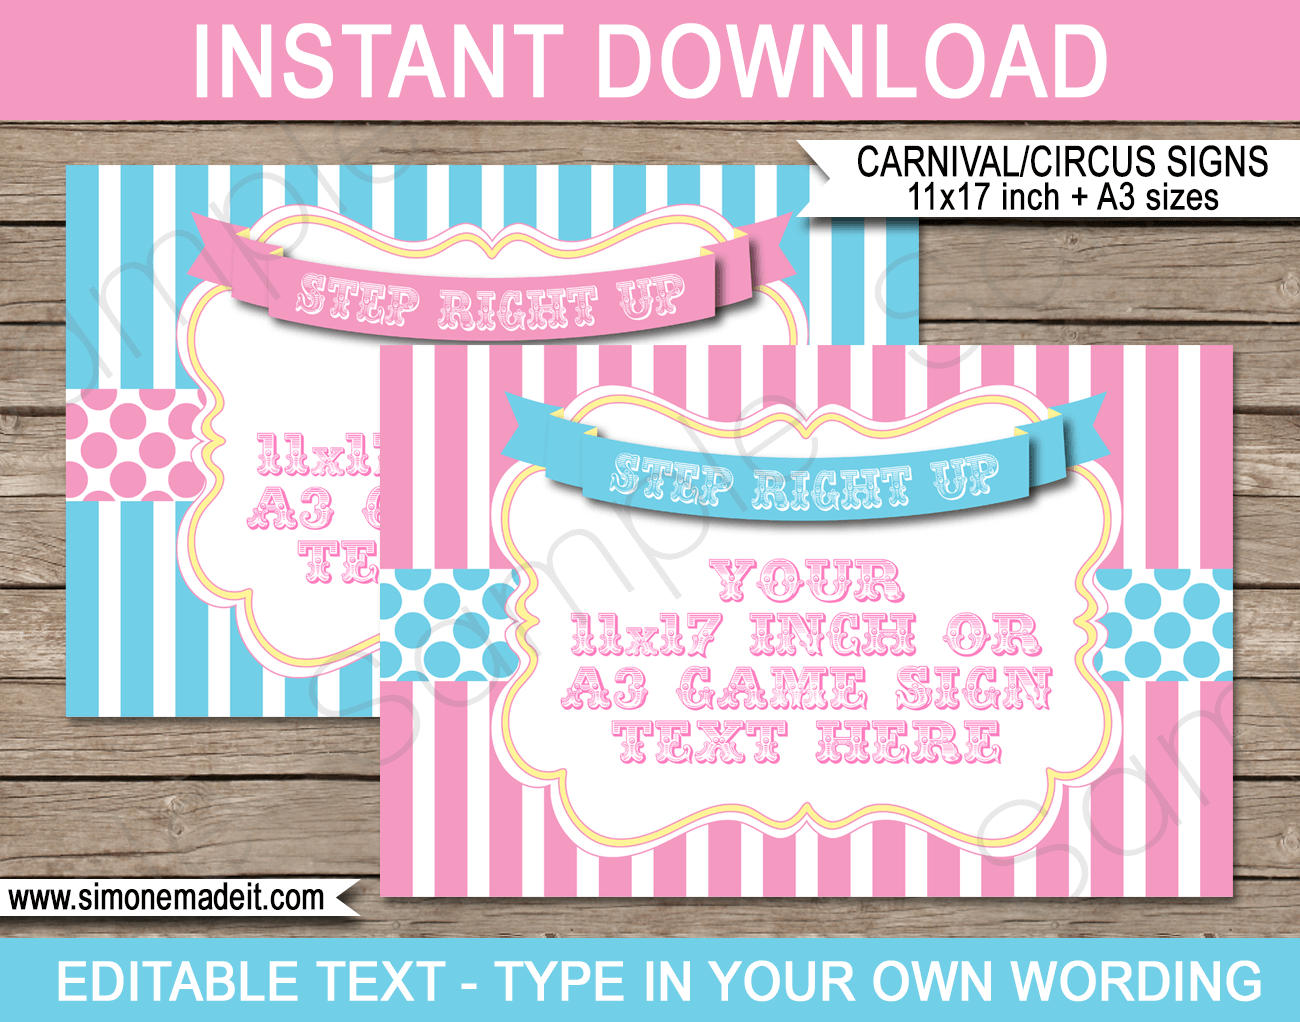 Printable Carnival Birthday Game Signs | Editable Text | Editable DIY Template | Circus Theme Party Decorations | $4.00 Instant Download via SIMONEmadeit.com